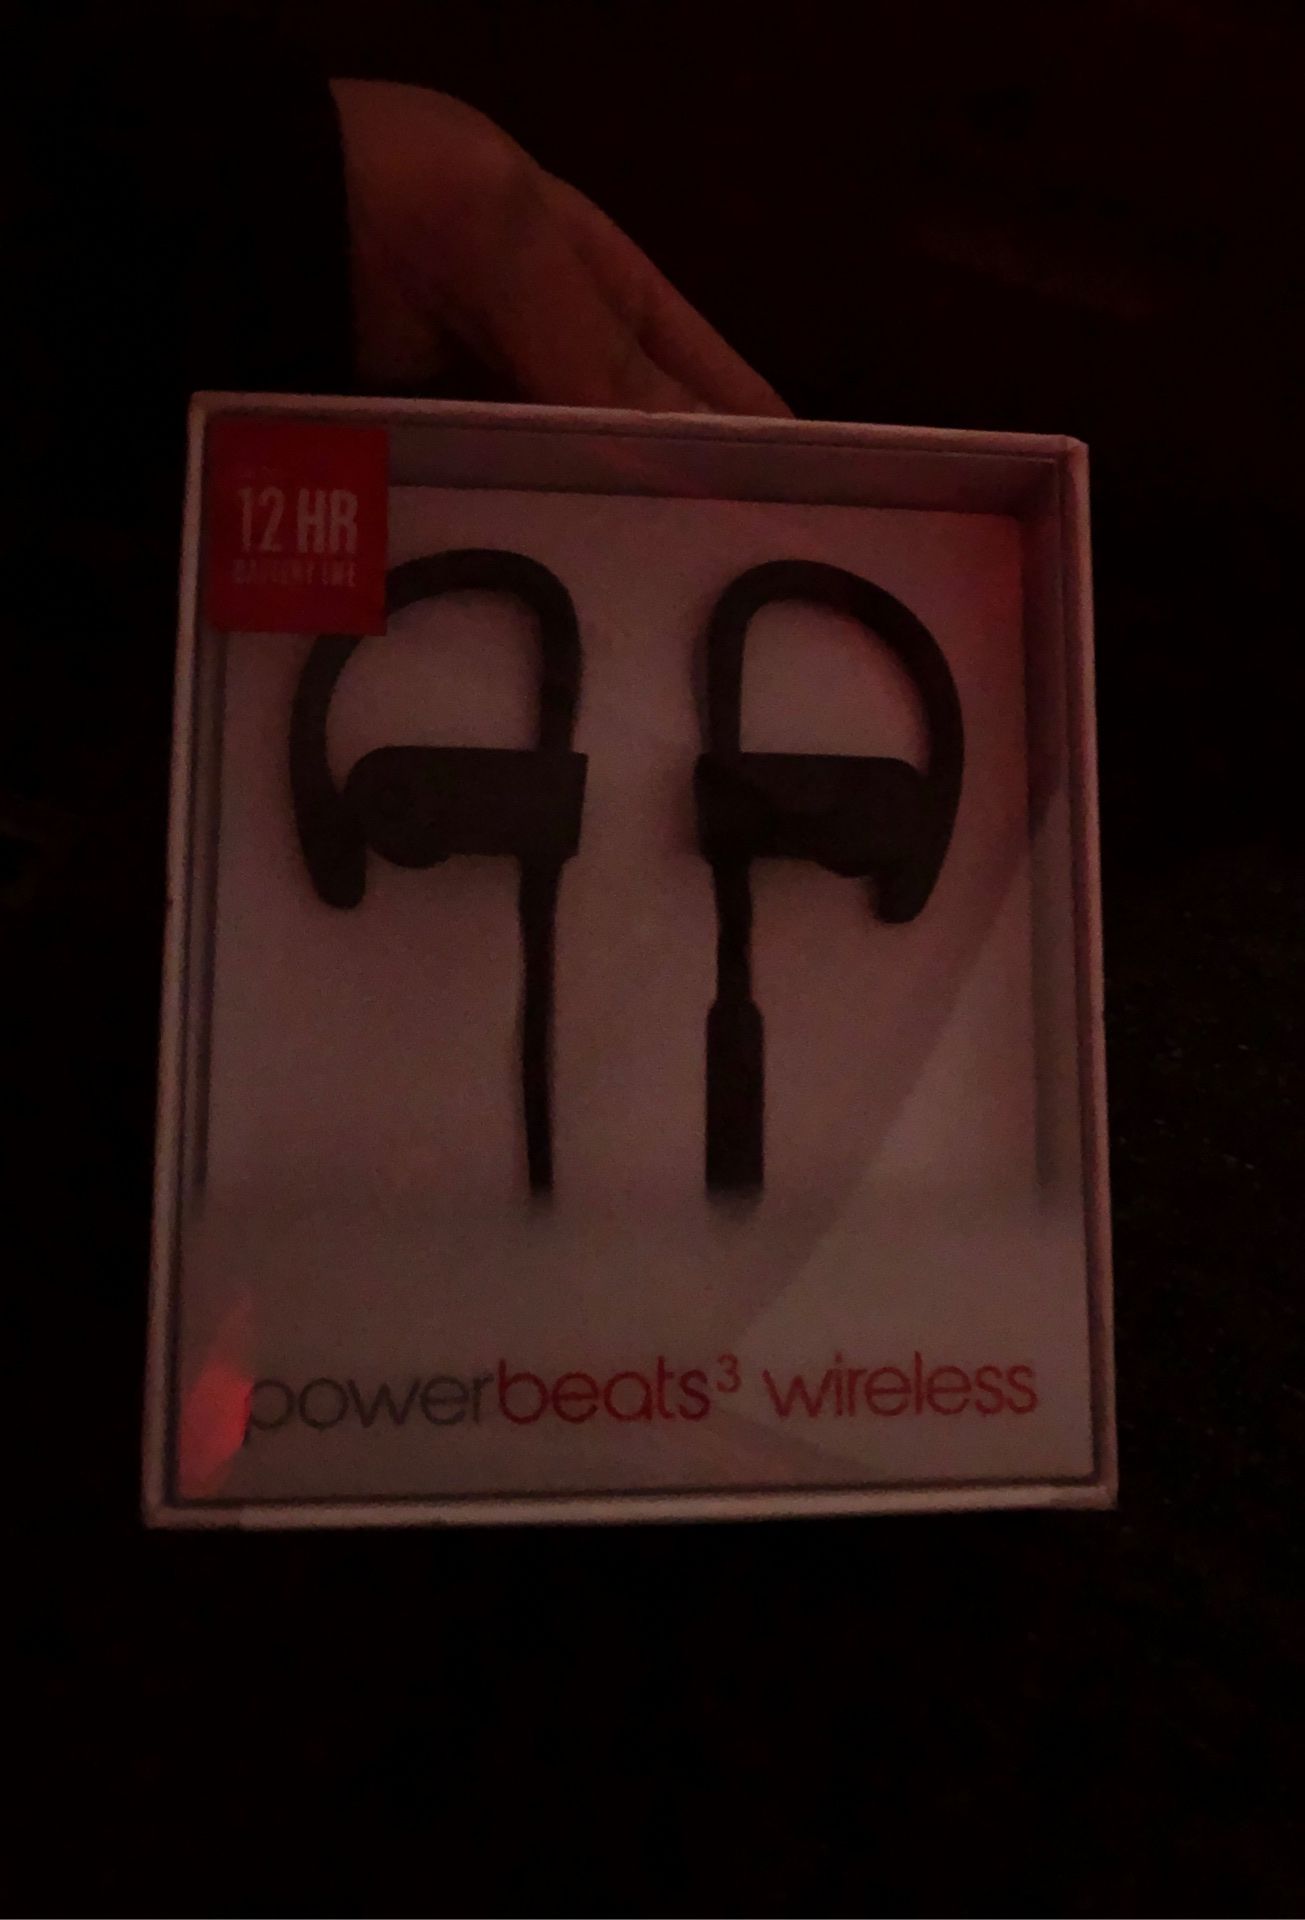 Brand new power beats 3 .. not touched or opened selling them for 80$ no negotiations that’s the best price on the market!! HMU before it’s sold!!